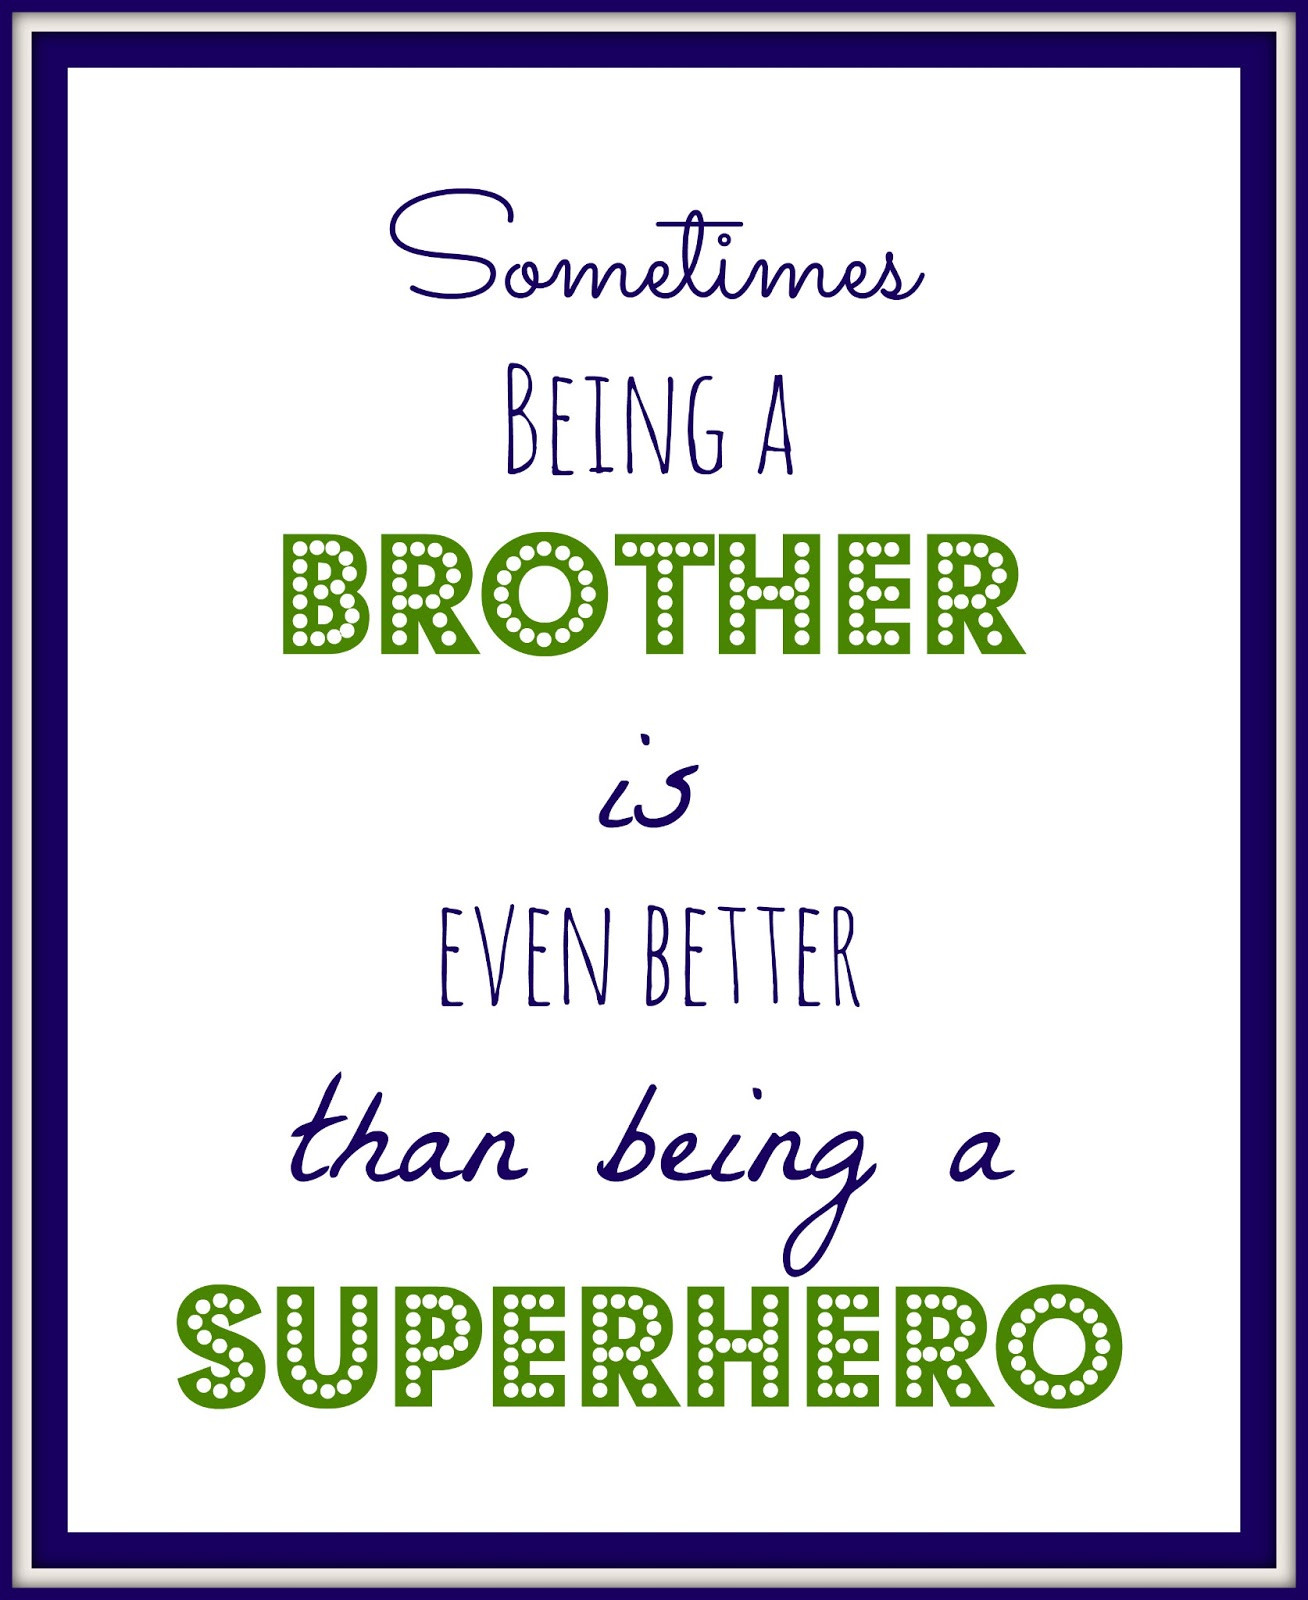 Birthday Quotes For Big Brother
 Big Brother Birthday Quotes QuotesGram